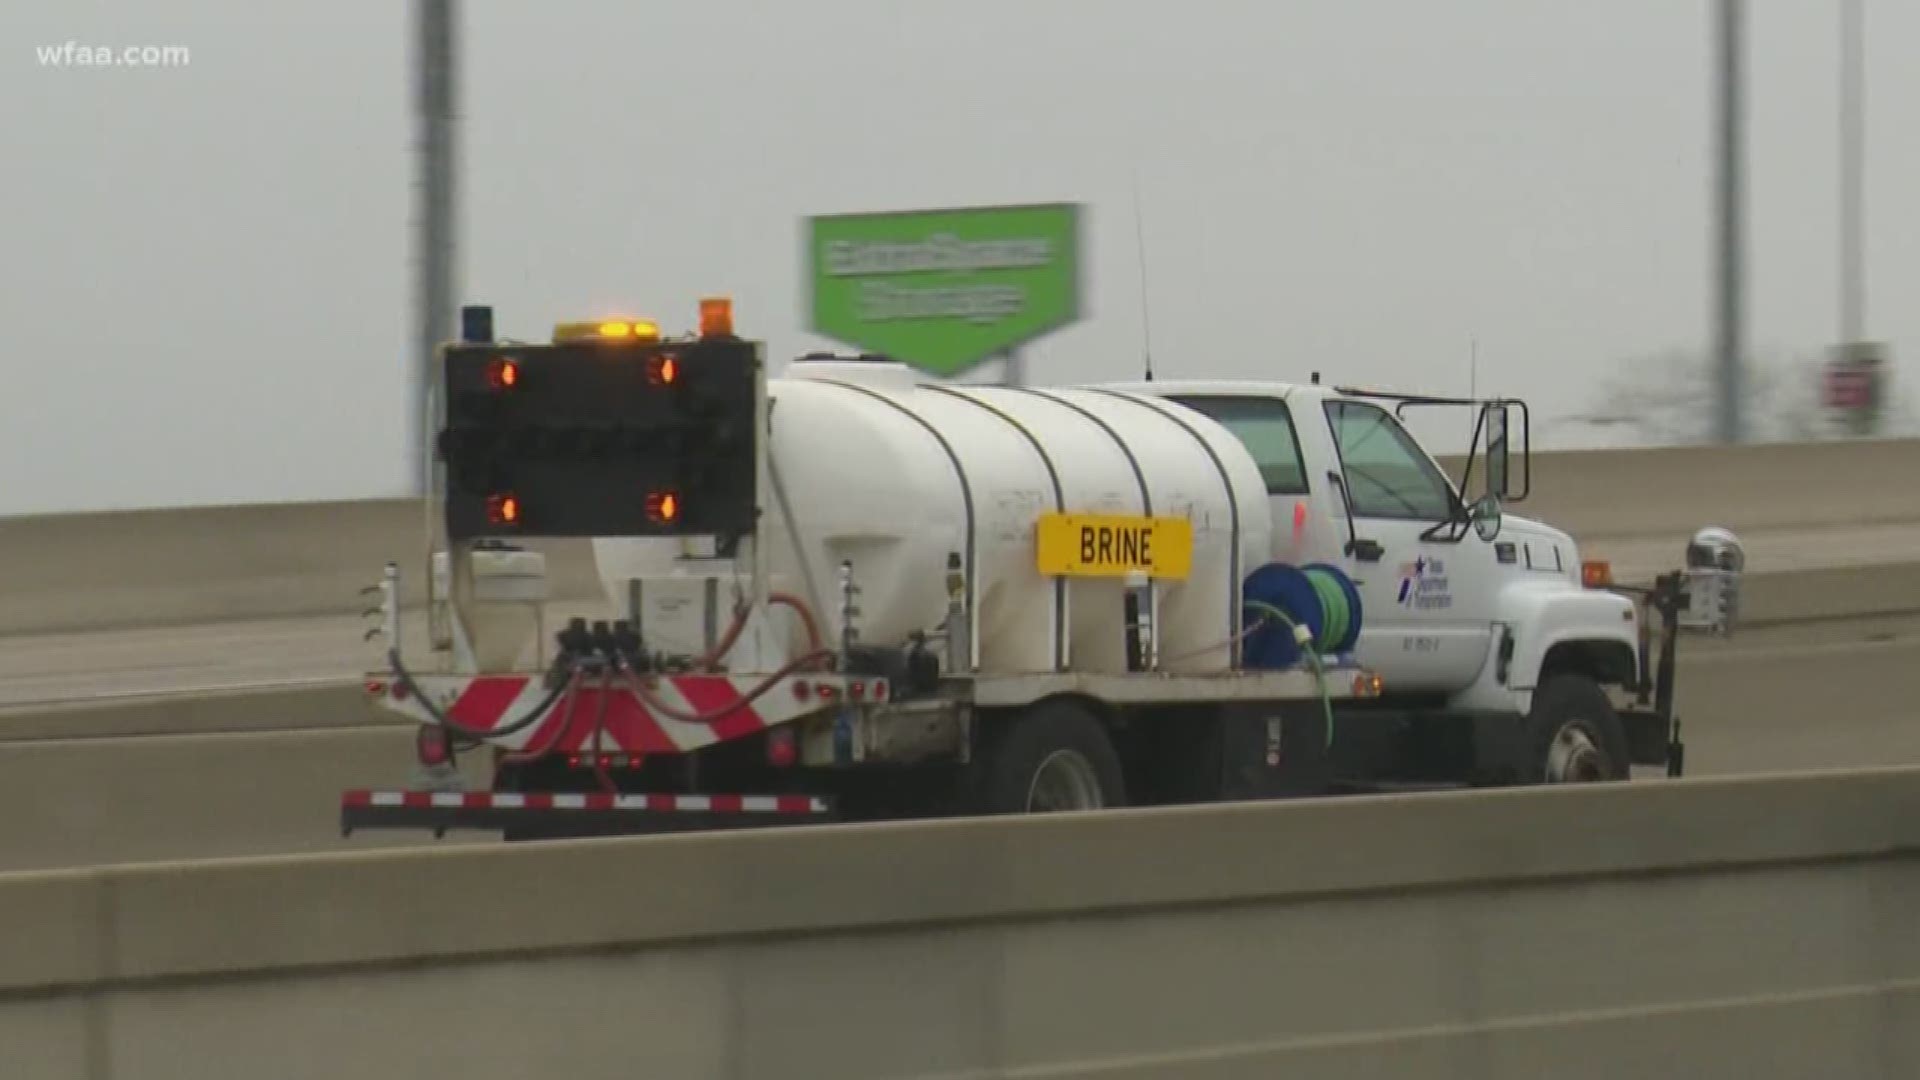 Here's how TxDOT prepares for inclement weather.